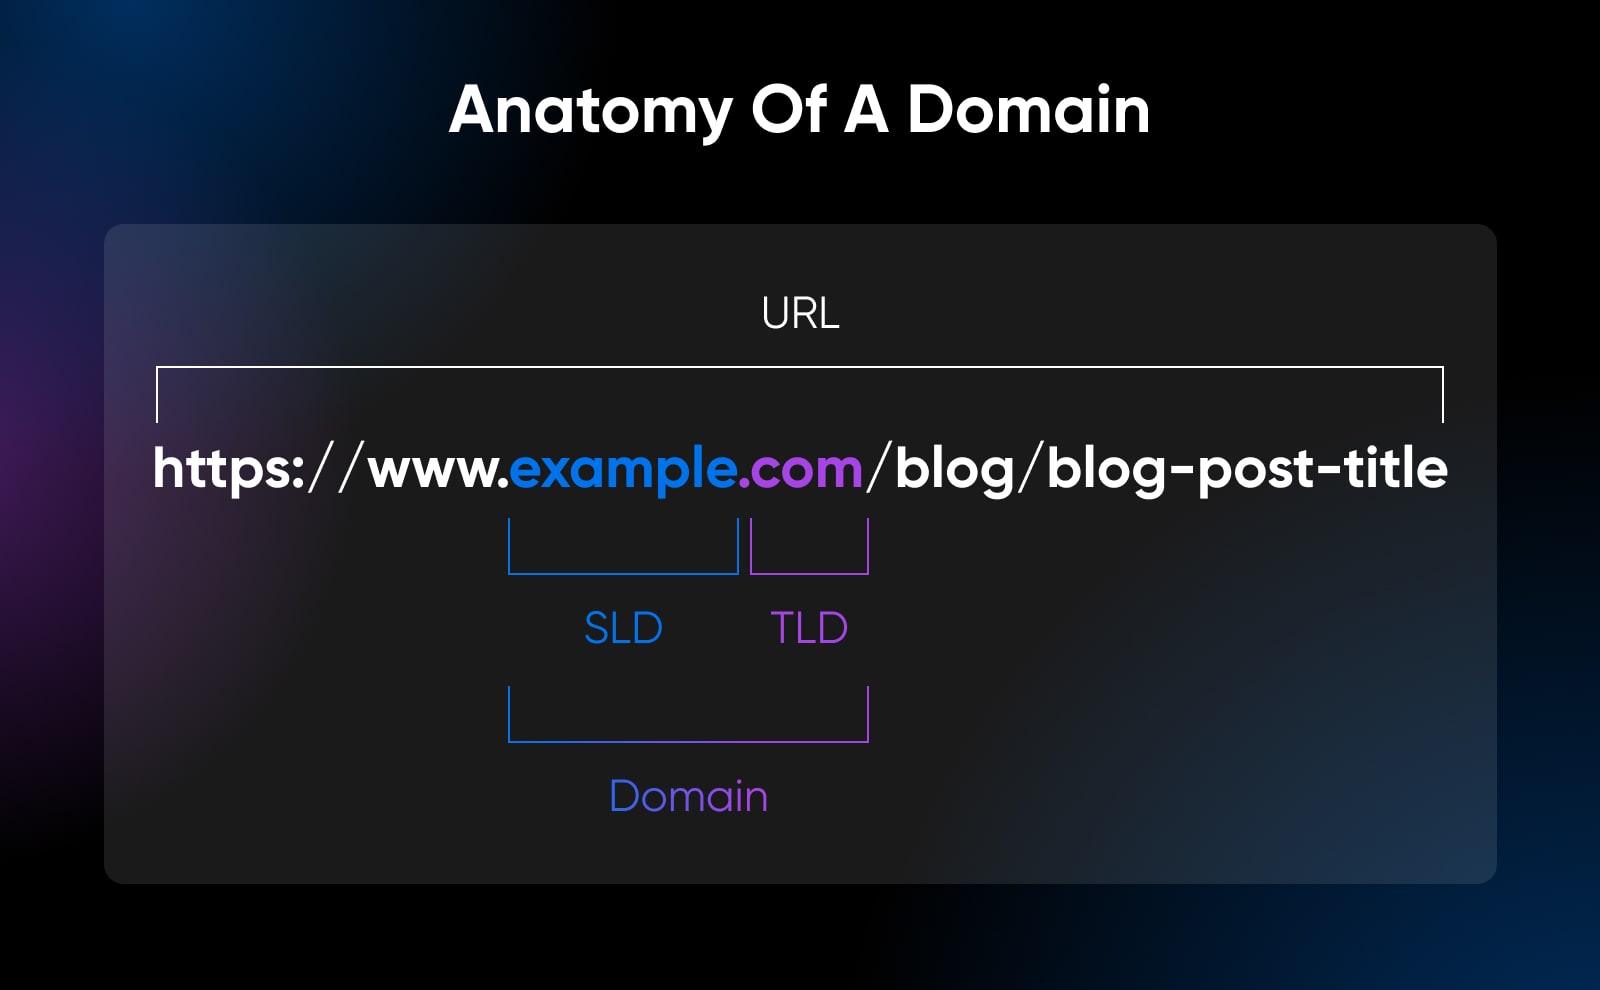 anatomy of a domain showing the domain (example.com) is made up of the SLD (exampe) and TLD (.com) 